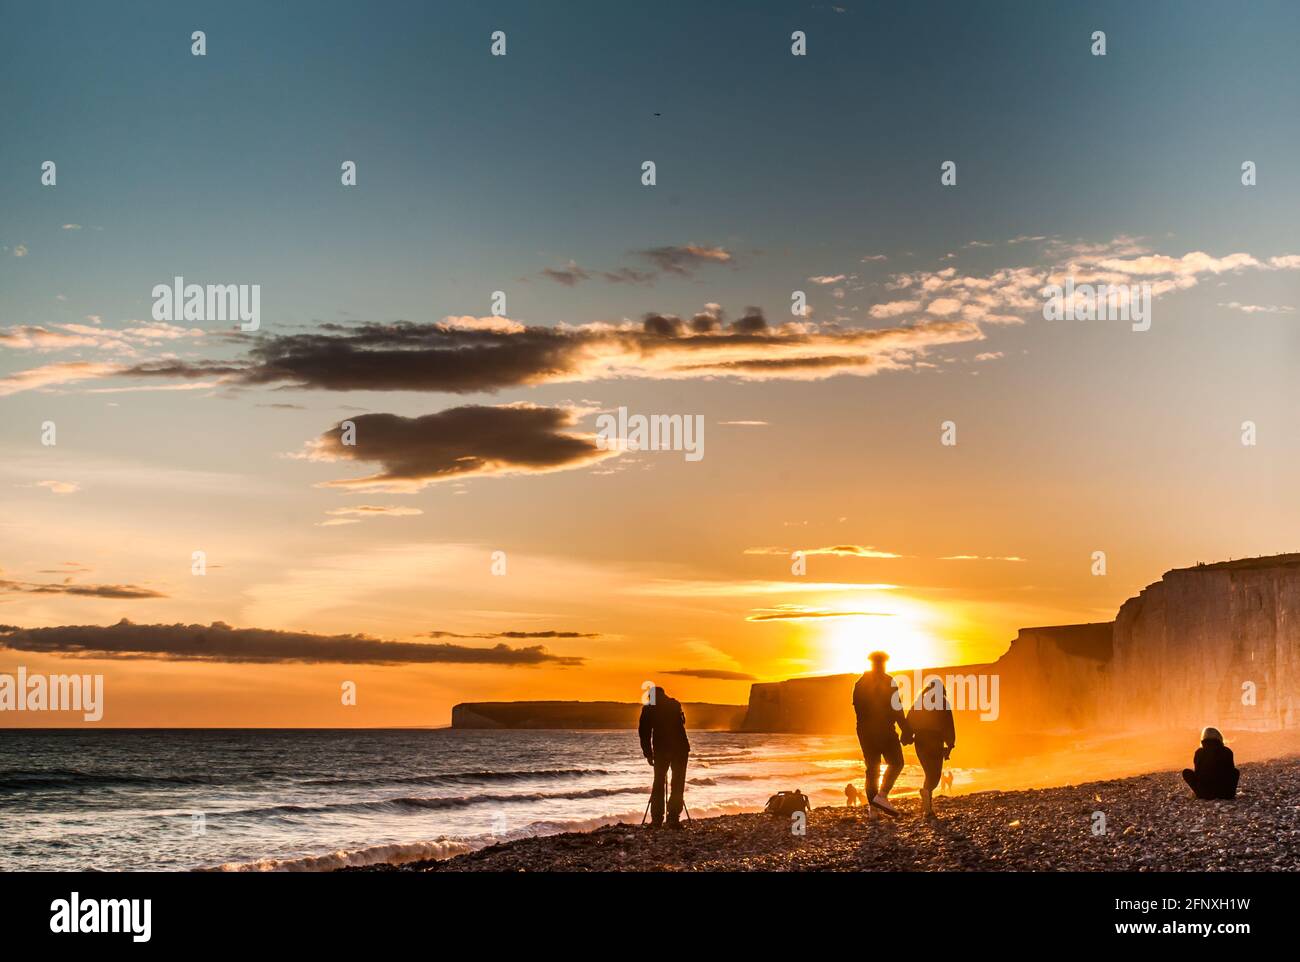 Birling Gap, Eastbourne, East Sussex, UK. 19th May, 2021. Glorious sunset over the Seven Sisters chalk cliffs beneath scattered clouds. Couple walk hand in hand on the beach past photographer capturing the scene. Credit: David Burr/Alamy Live News Stock Photo